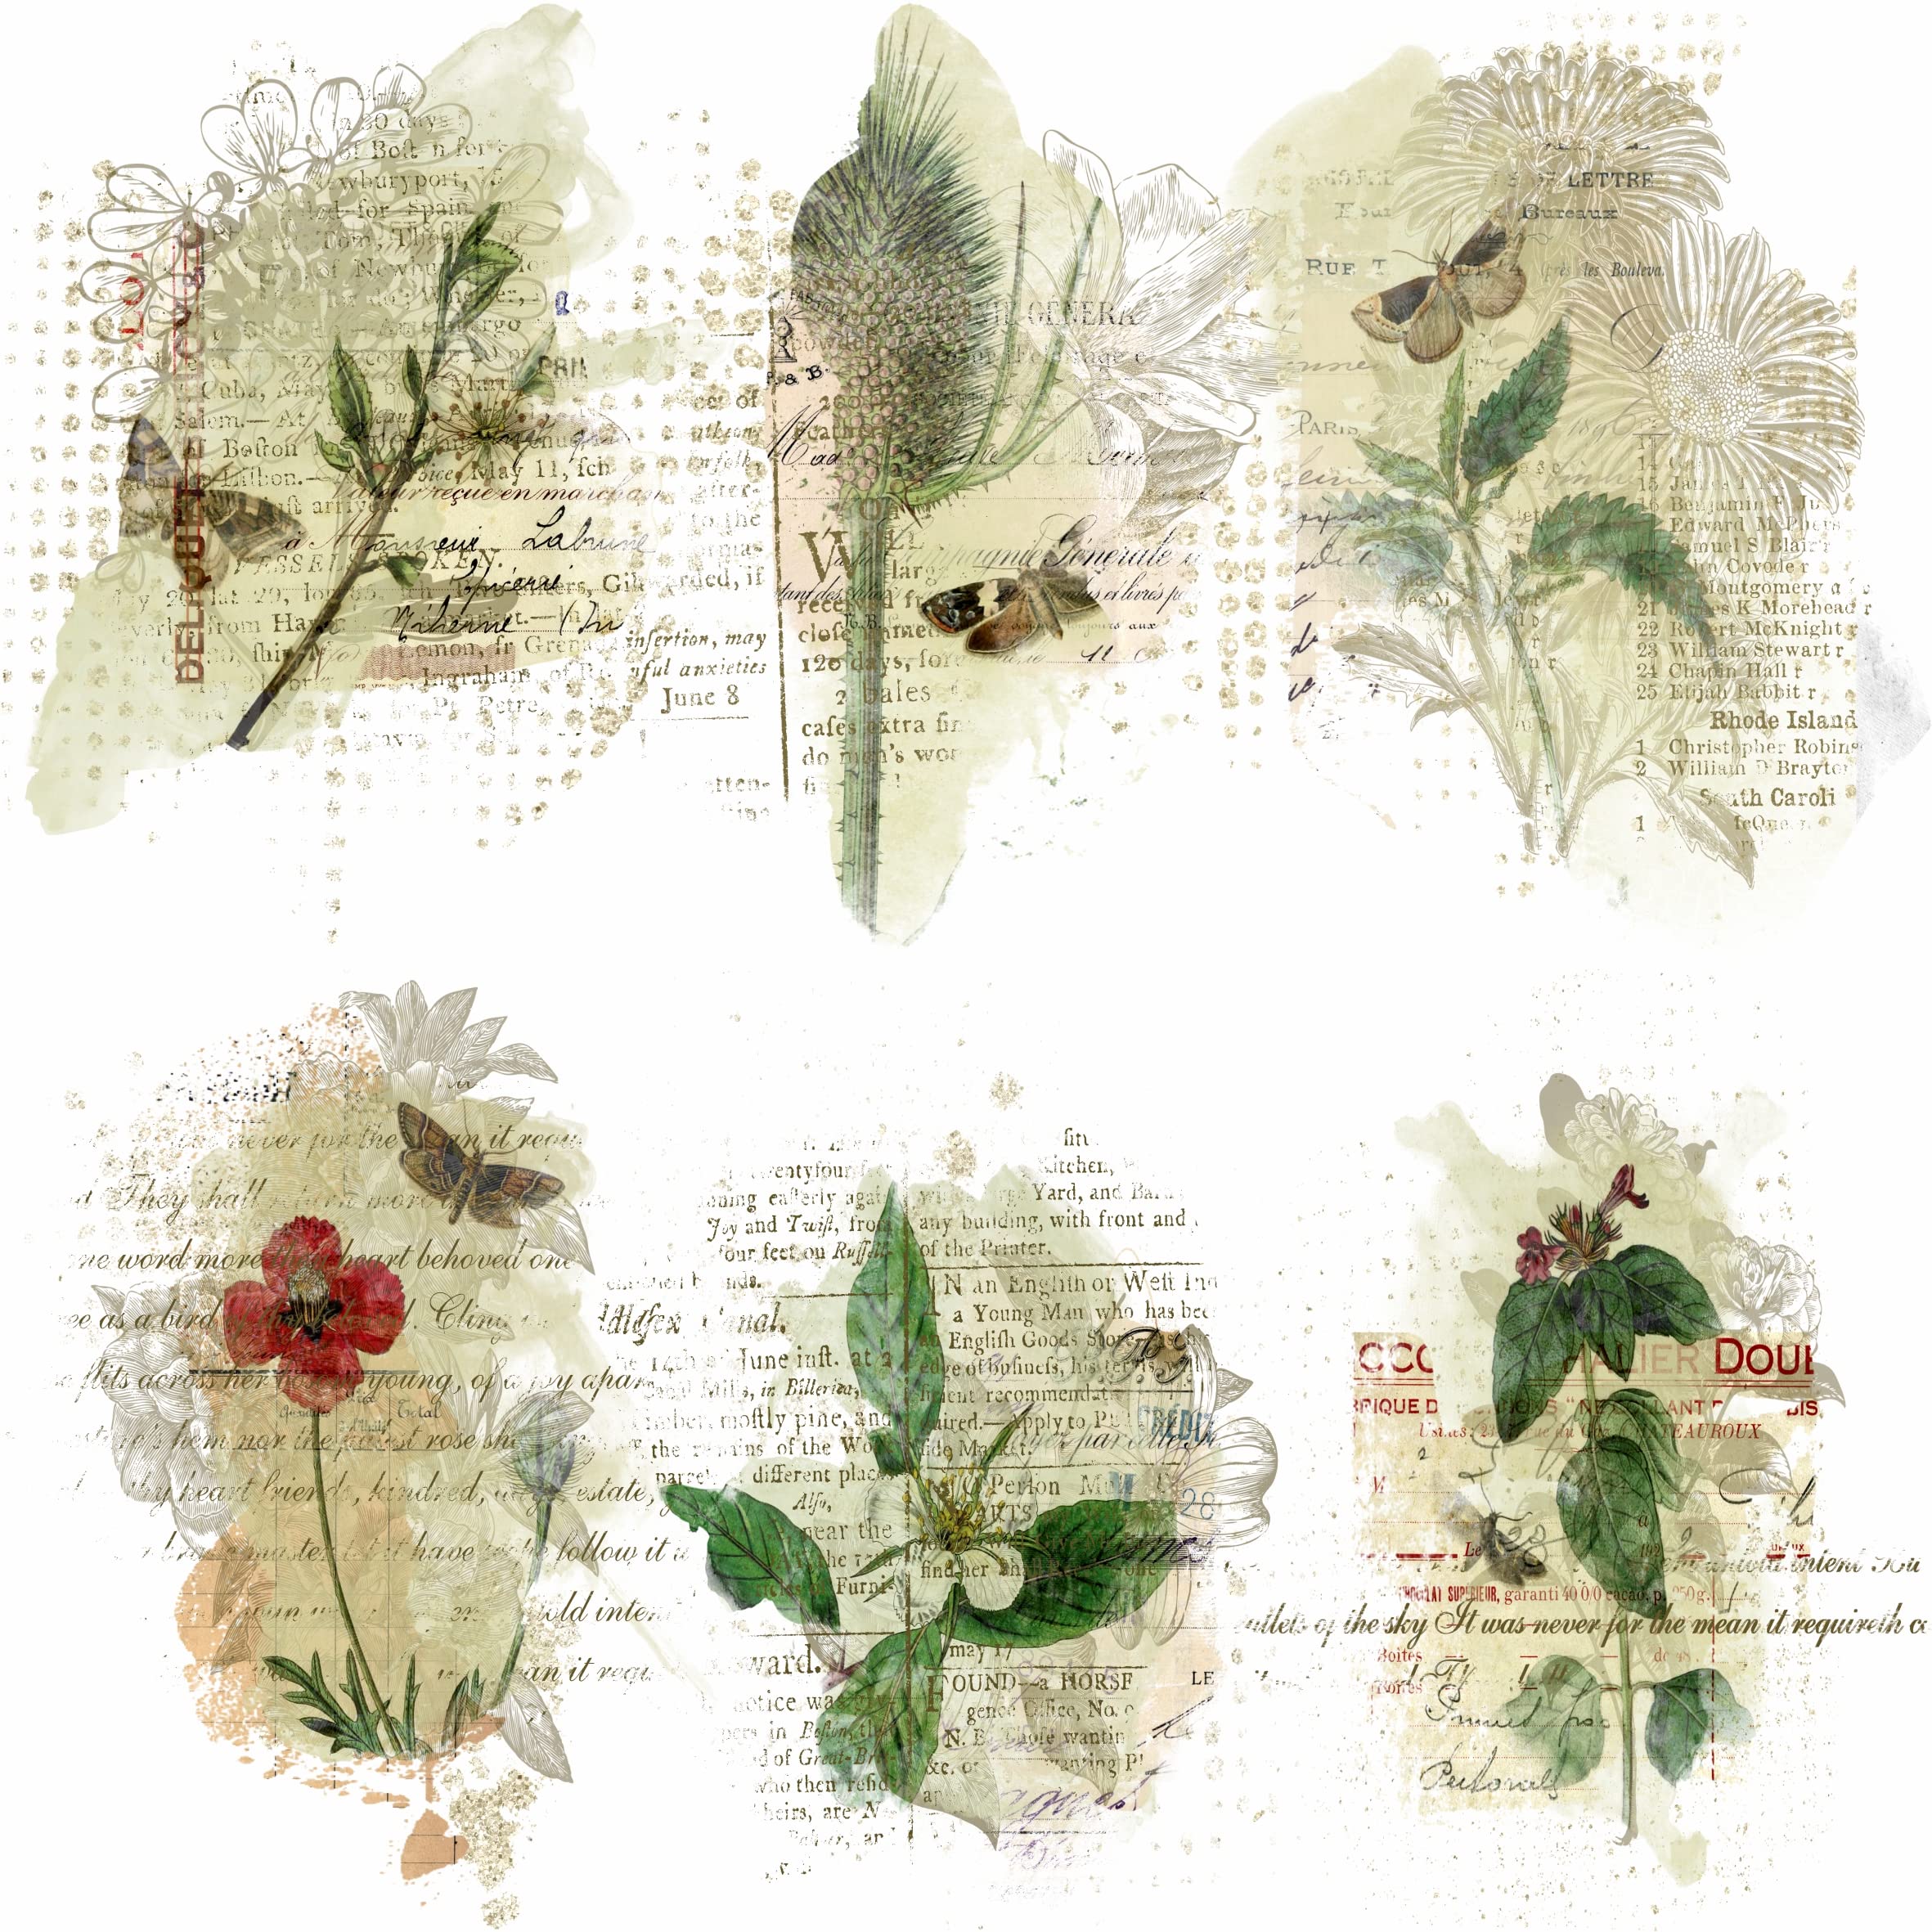 Woodland Theme Mulberry Rice Paper, 8 x 10.5 inch - 6 x Different Printed  Mulberry Paper Images 30gsm Visible Fibres for Decoupage Crafts Mixed Media